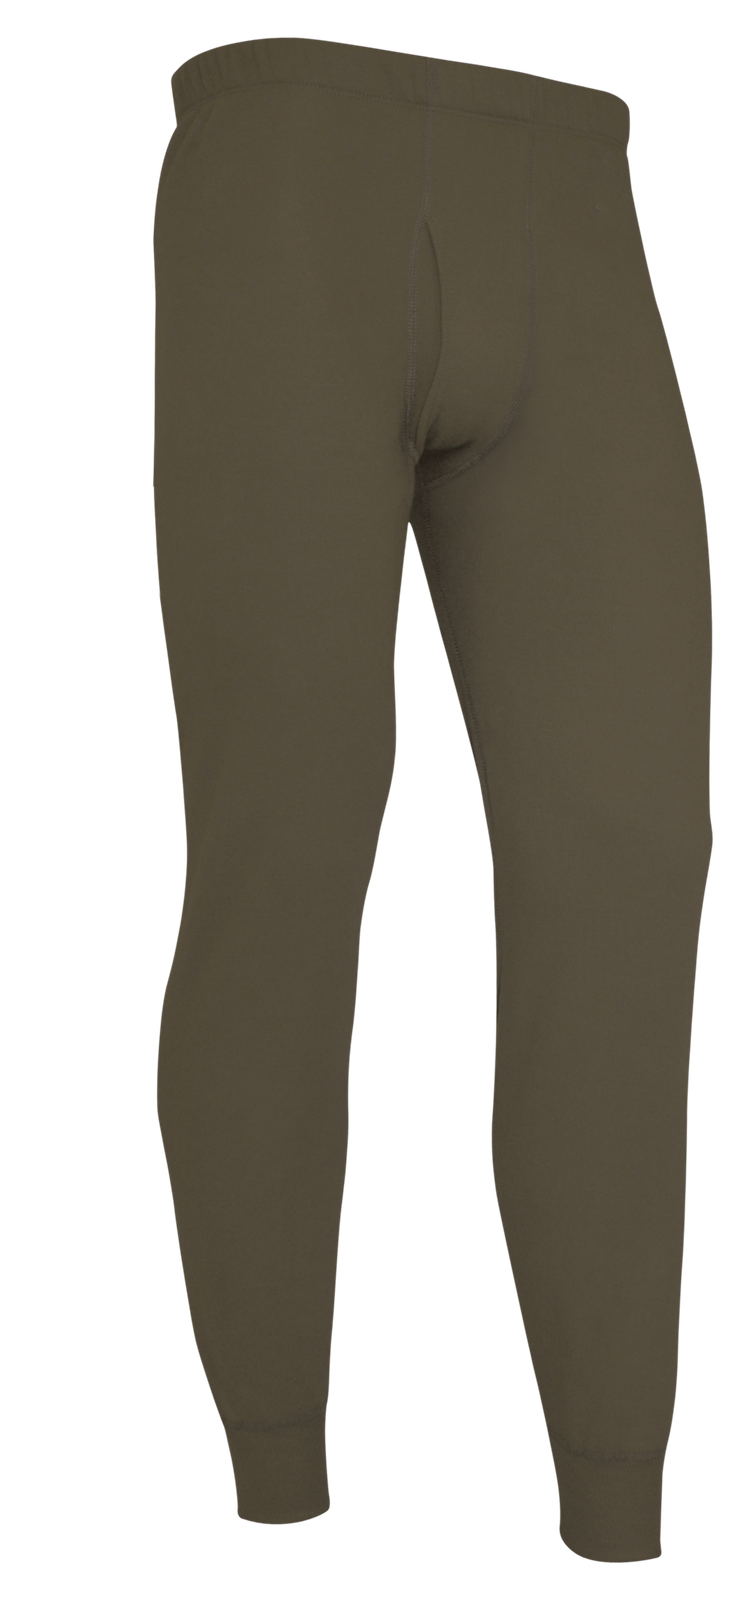 NEW* Men's XL Heavyweight Thermal Pants - All in Motion